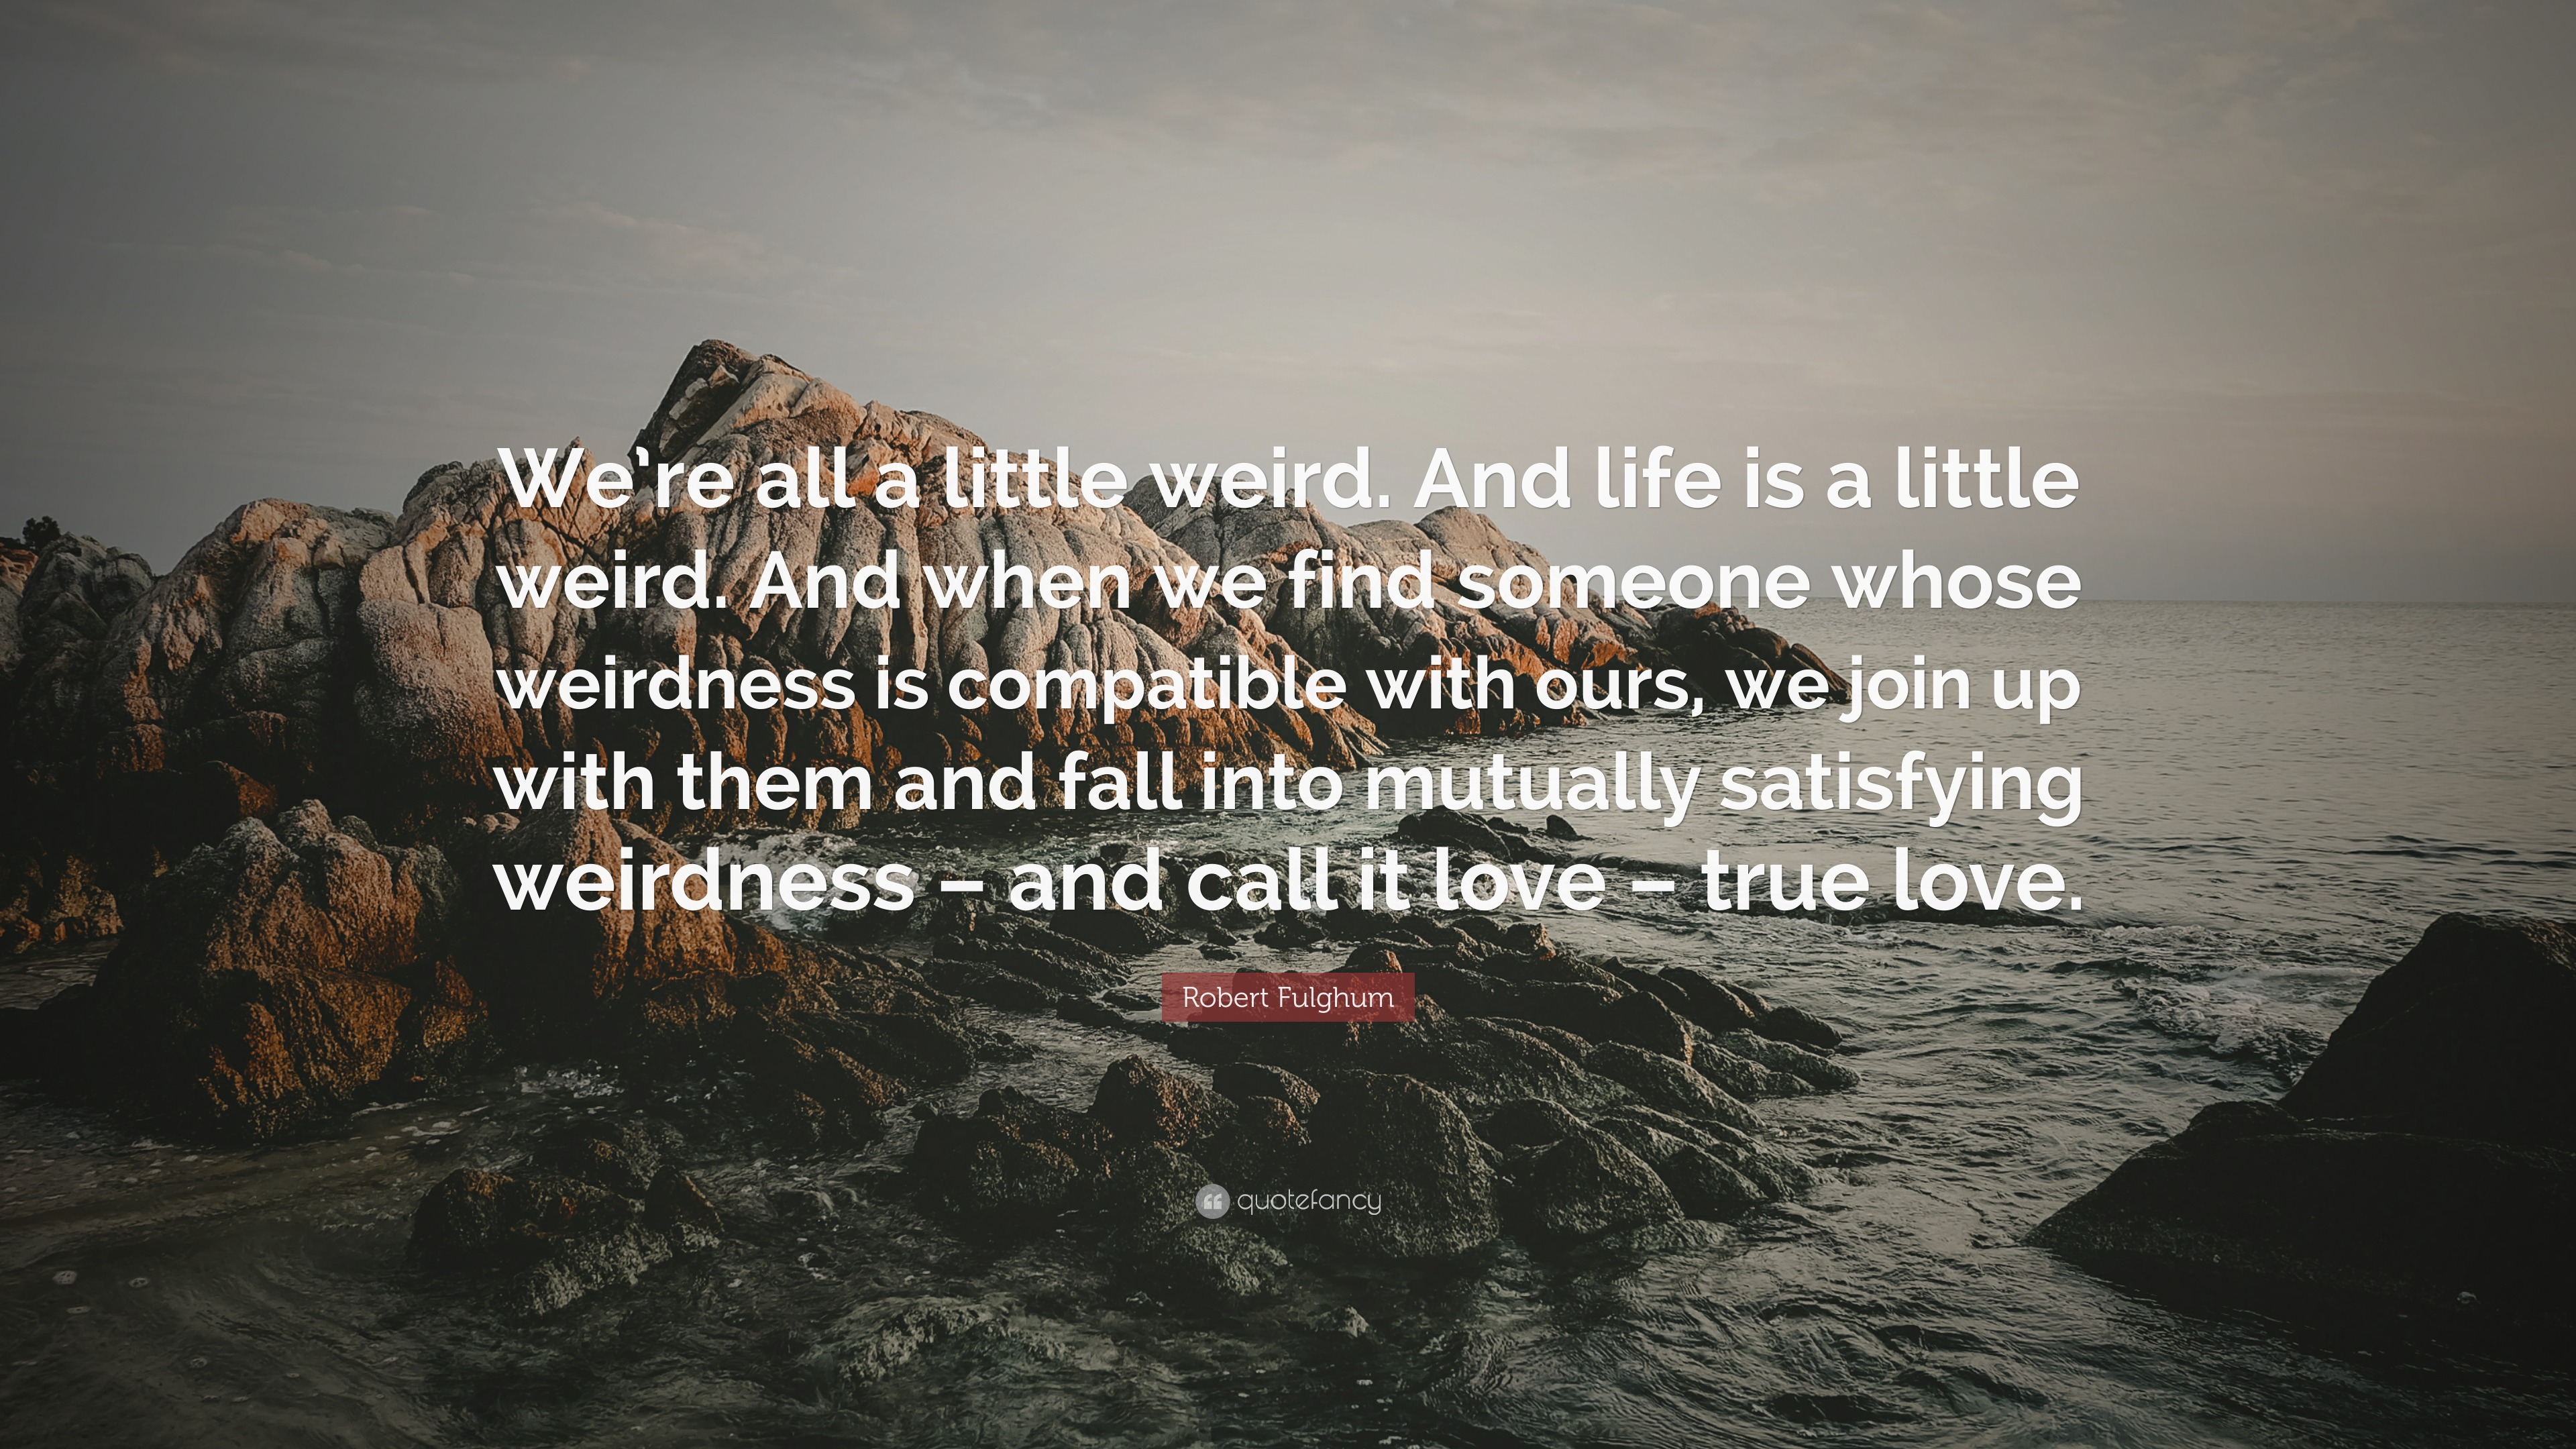 Robert Fulghum Quote: "We're all a little weird. And life is a little weird. And when we find ...